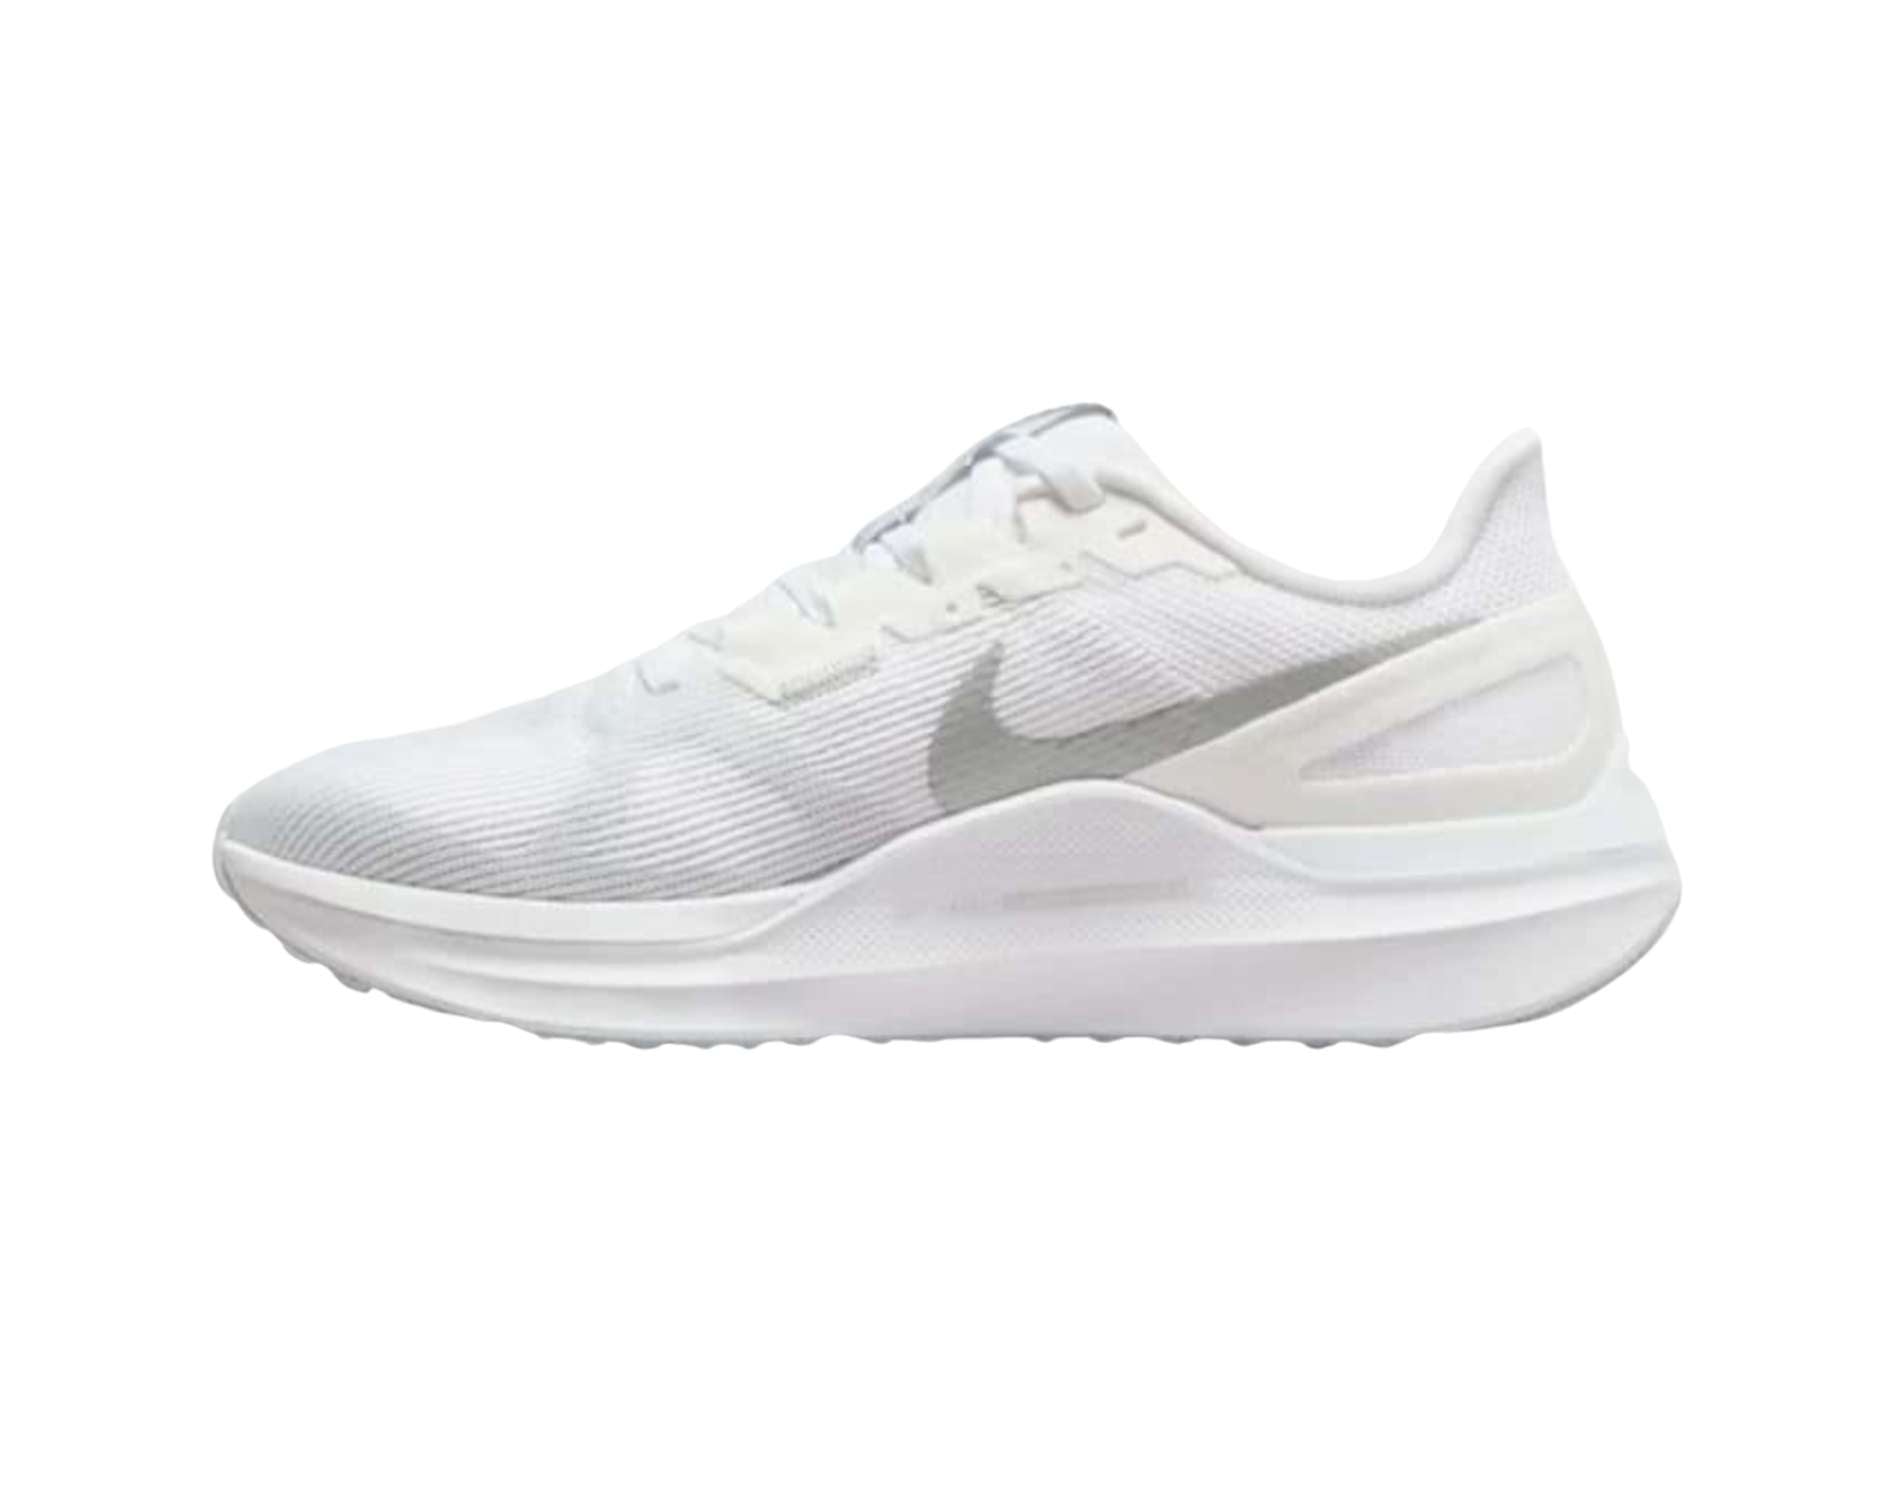 Nikes Zoom Structure 25 womens road running shoes in white pure silver platinum colour.